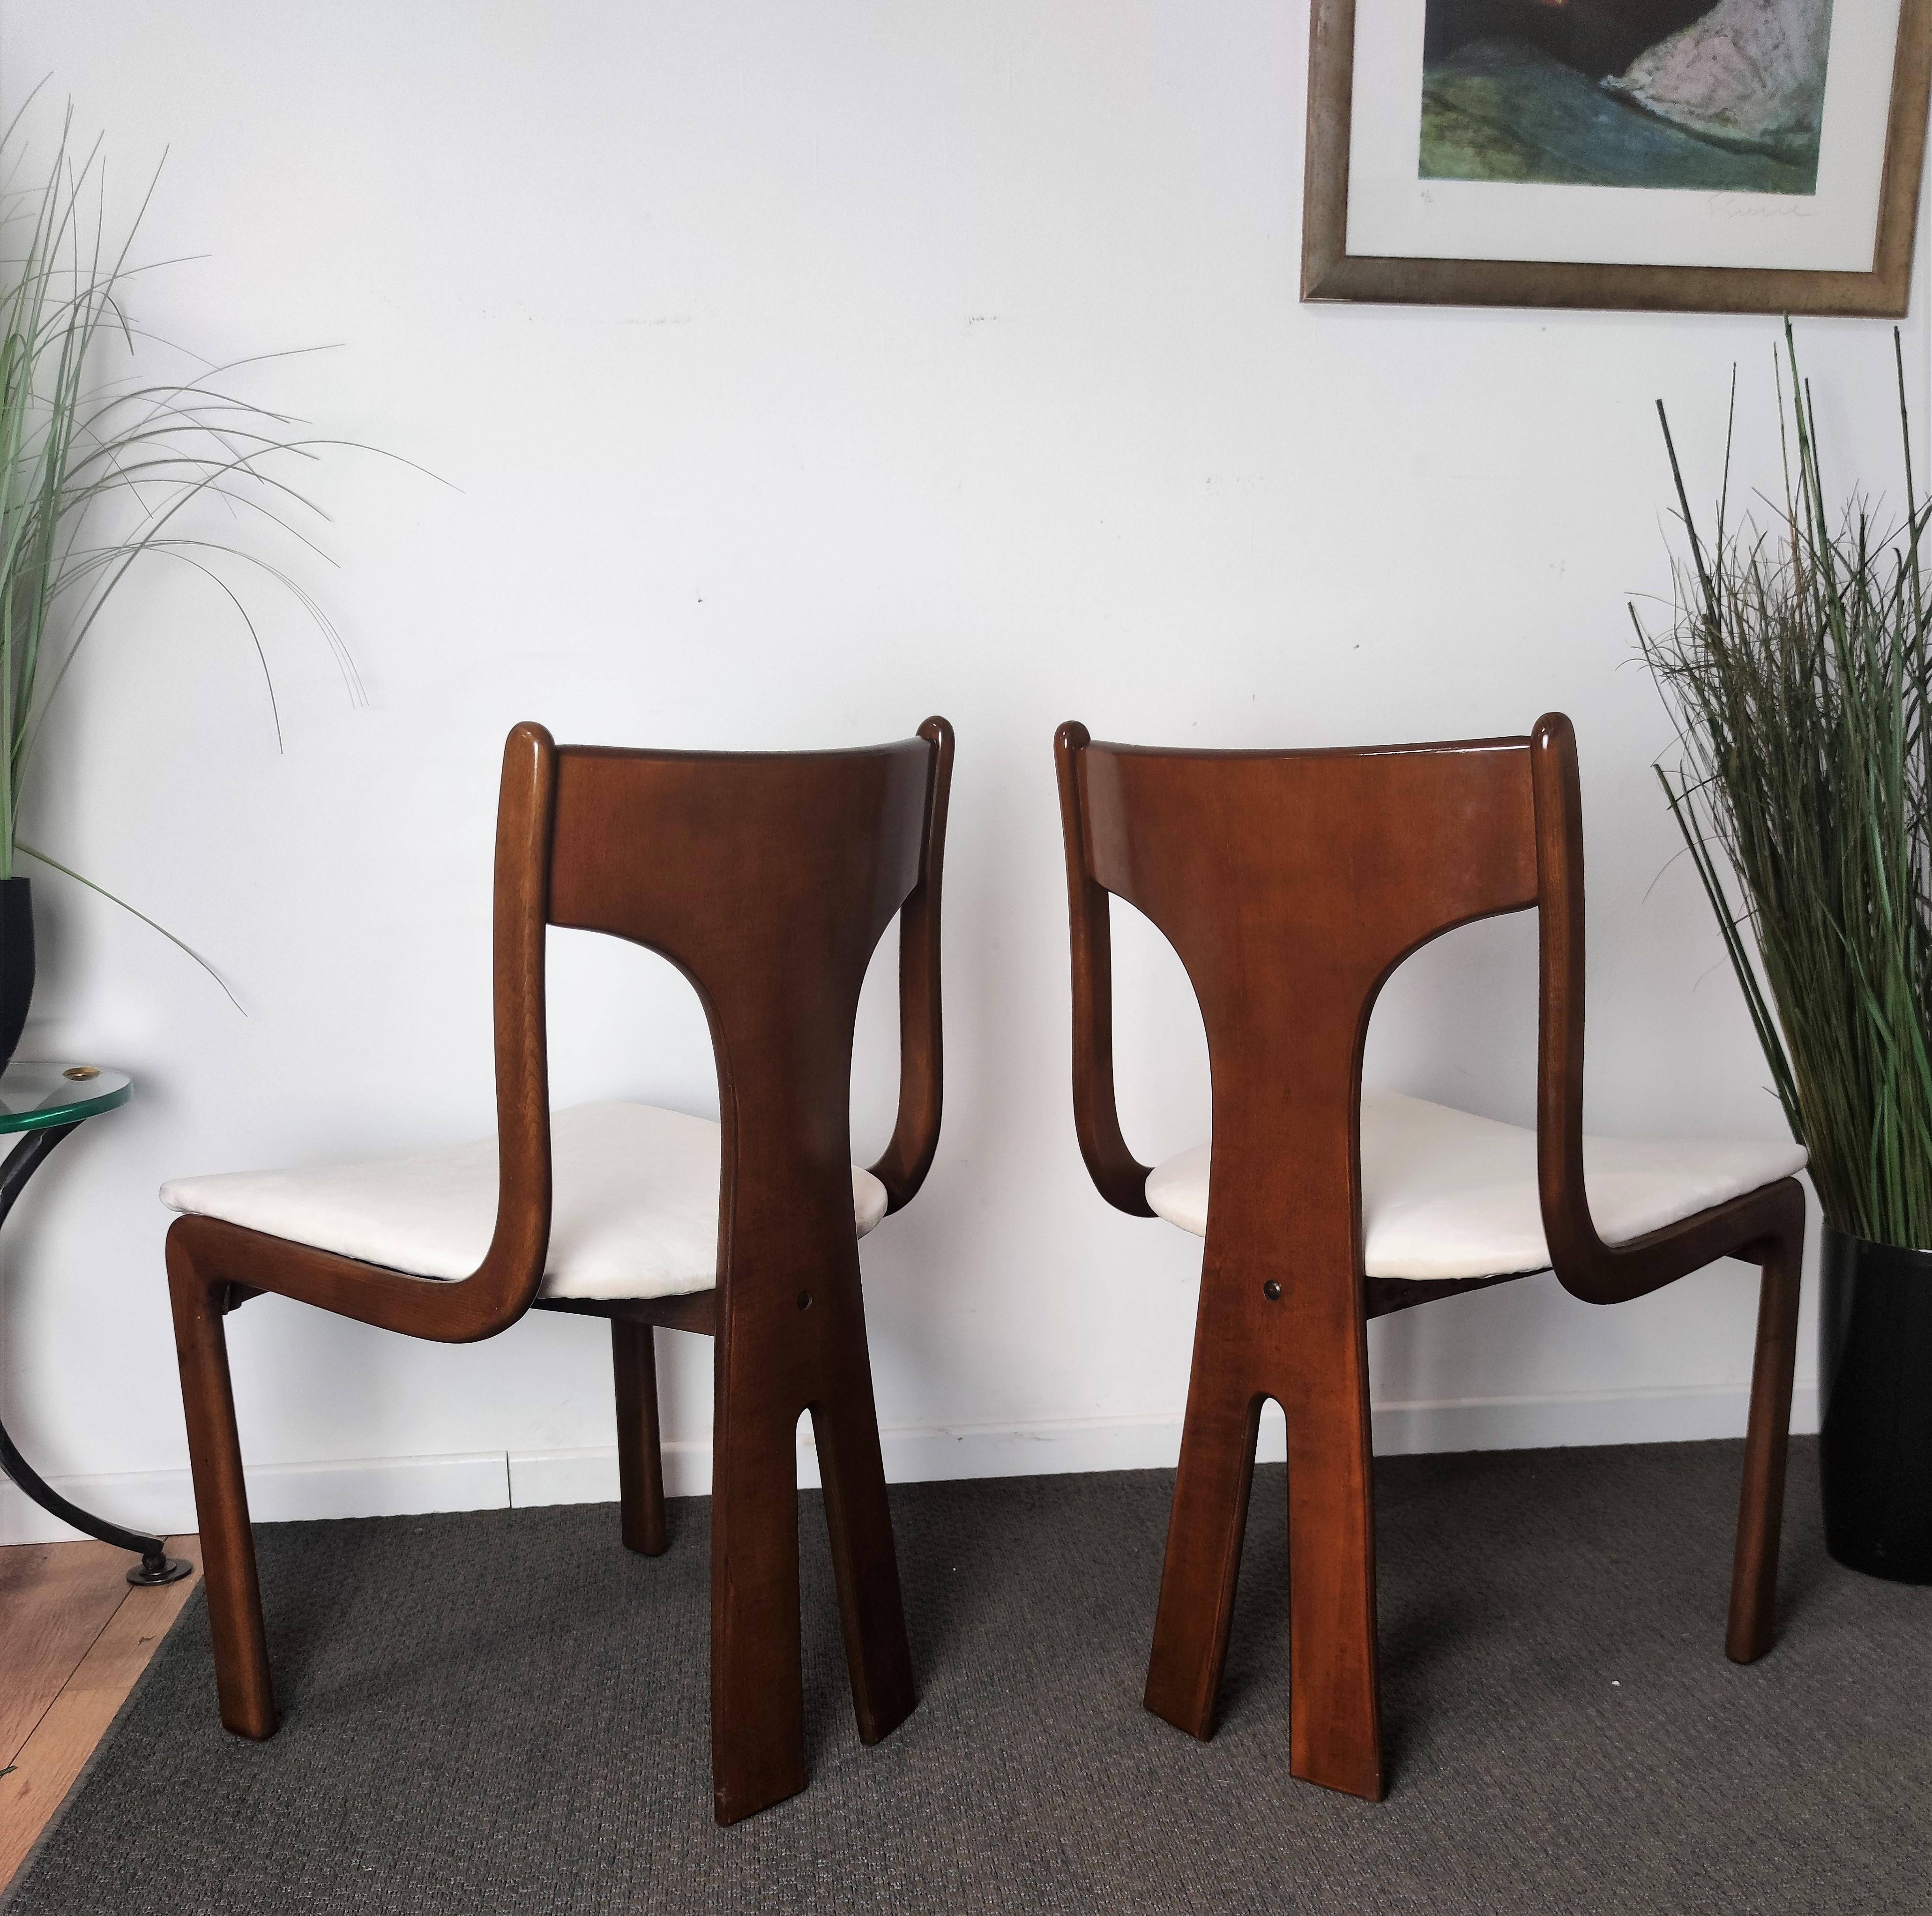 Four 1950s Italian Mid-Century Modern Newly Upholstered Dining Room Chairs 2